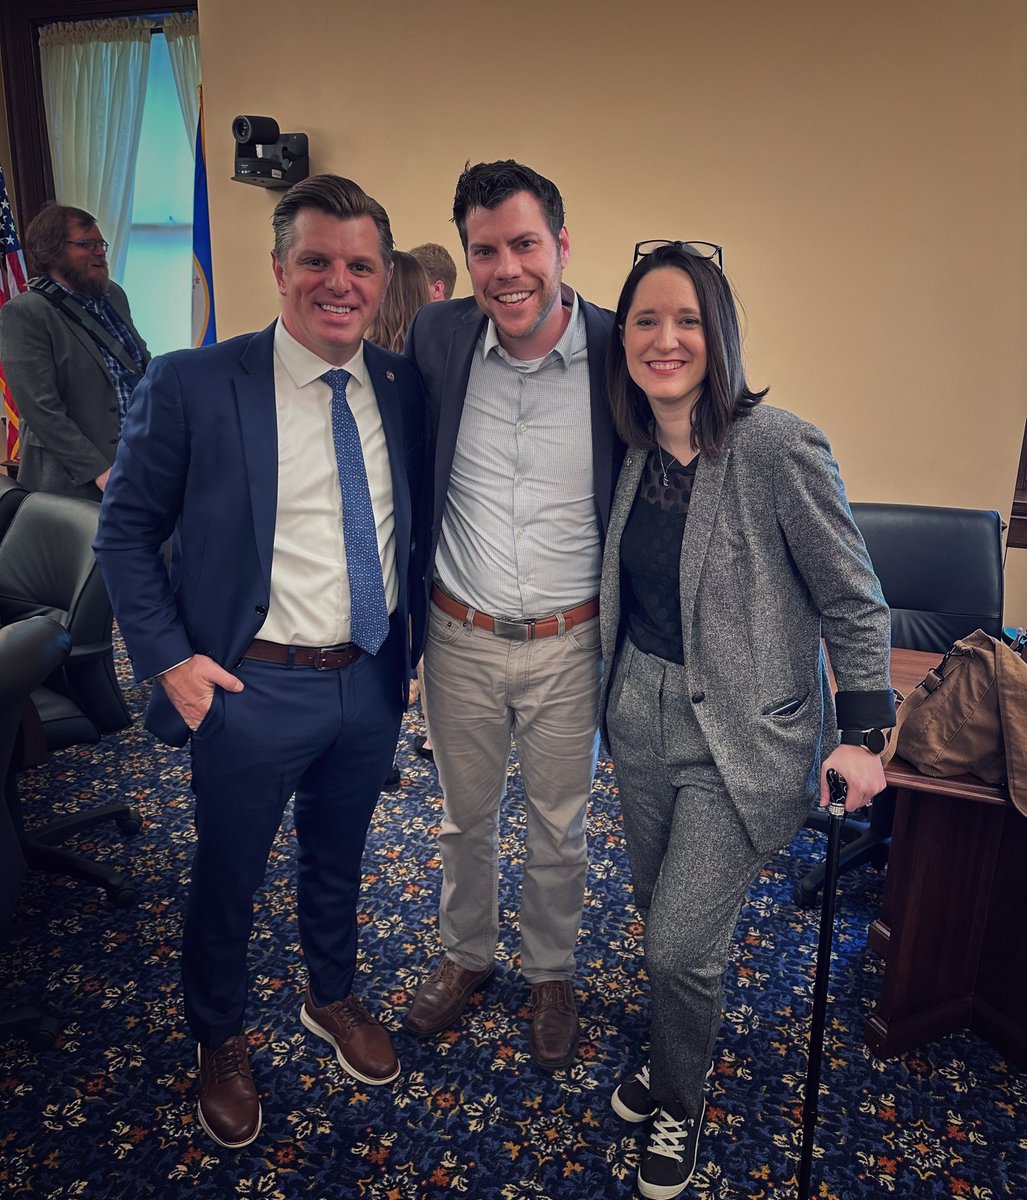 Grateful for these these great Housing Chars Rep. @mikehowardmn  & Sen. @Lindsey_Port  - they have created a historic Housing bill that creates #BringItHomeMN  - a new statewide voucher program along with a lot of other great things. The bill goes to floor votes soon #mnleg